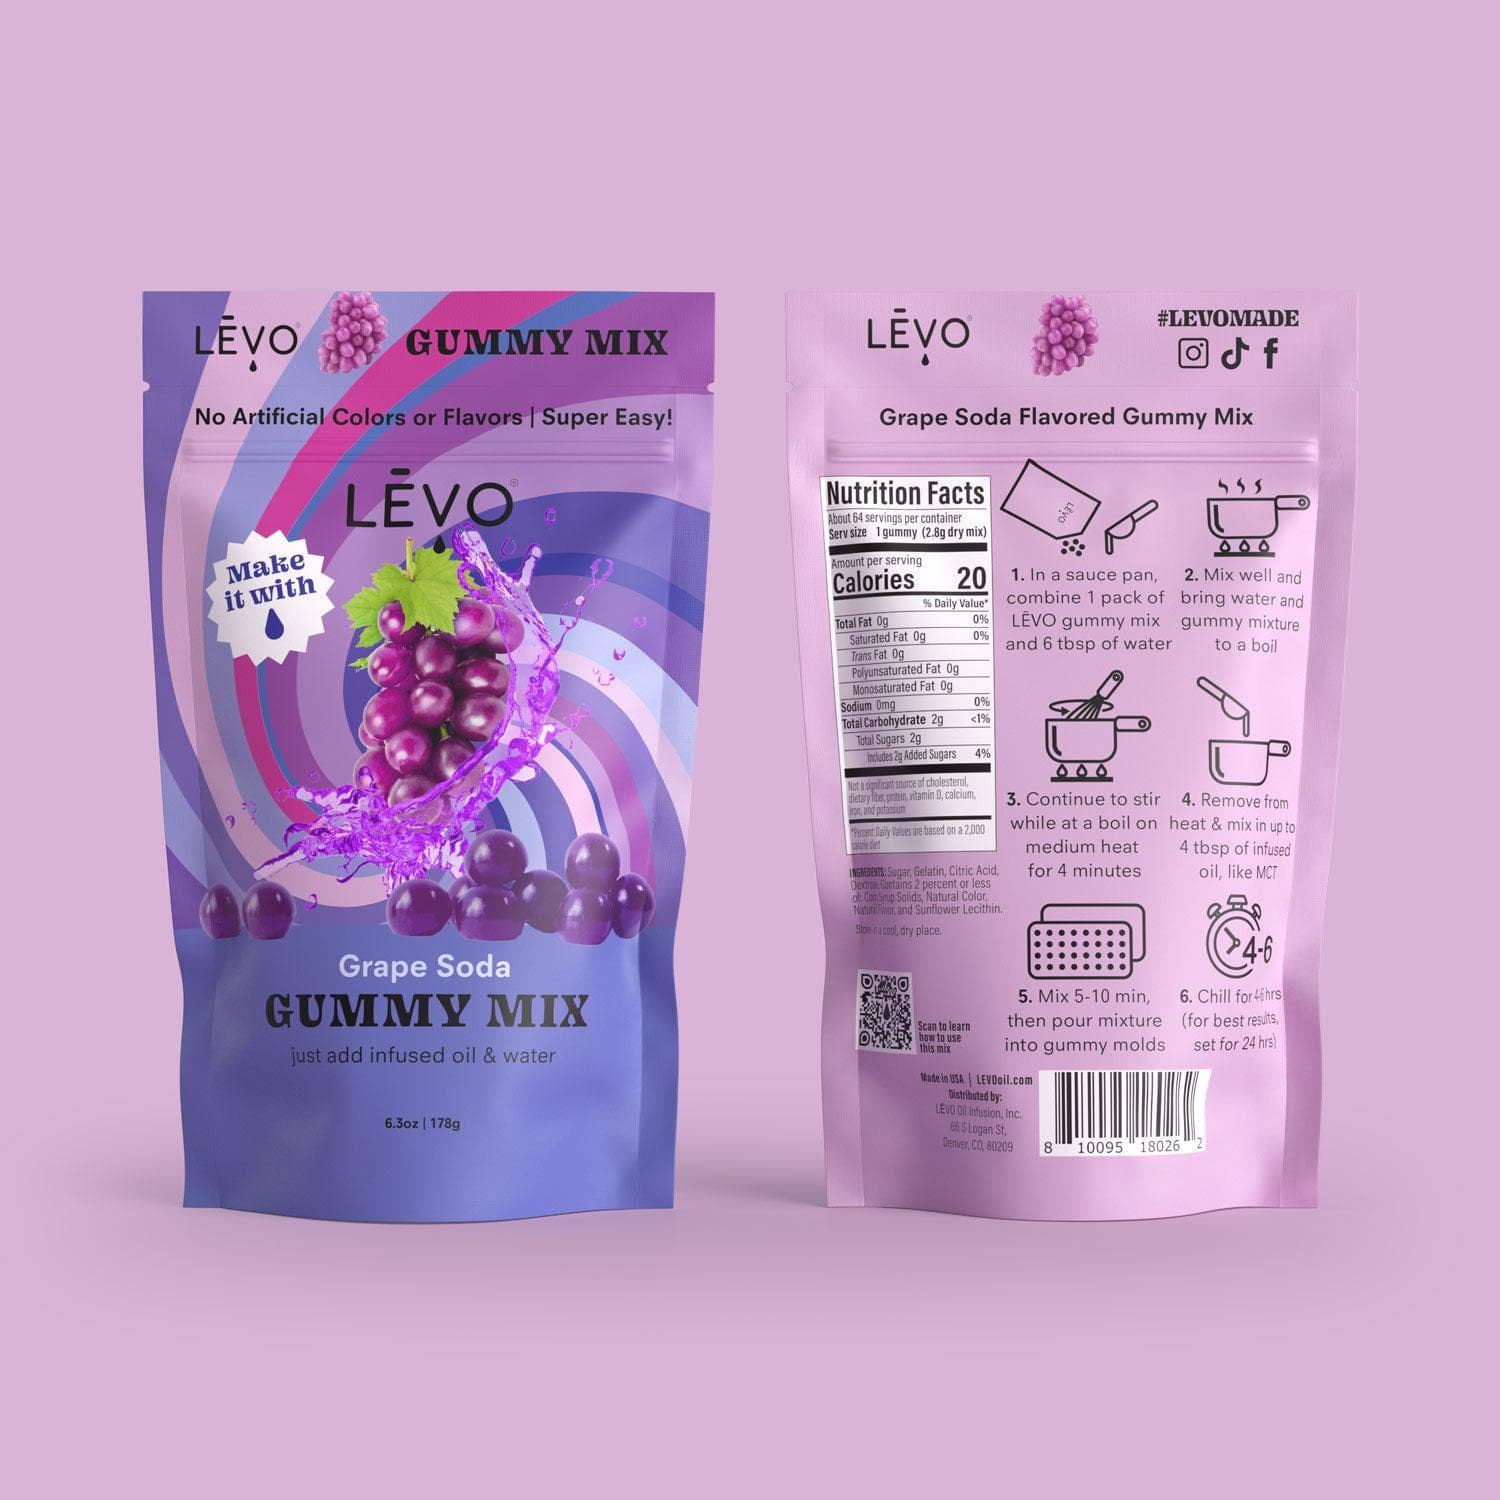 LEVO gummy bags contain all the instructions and information you need to make your own edibles in your kitchen. Save money by buying homemade.